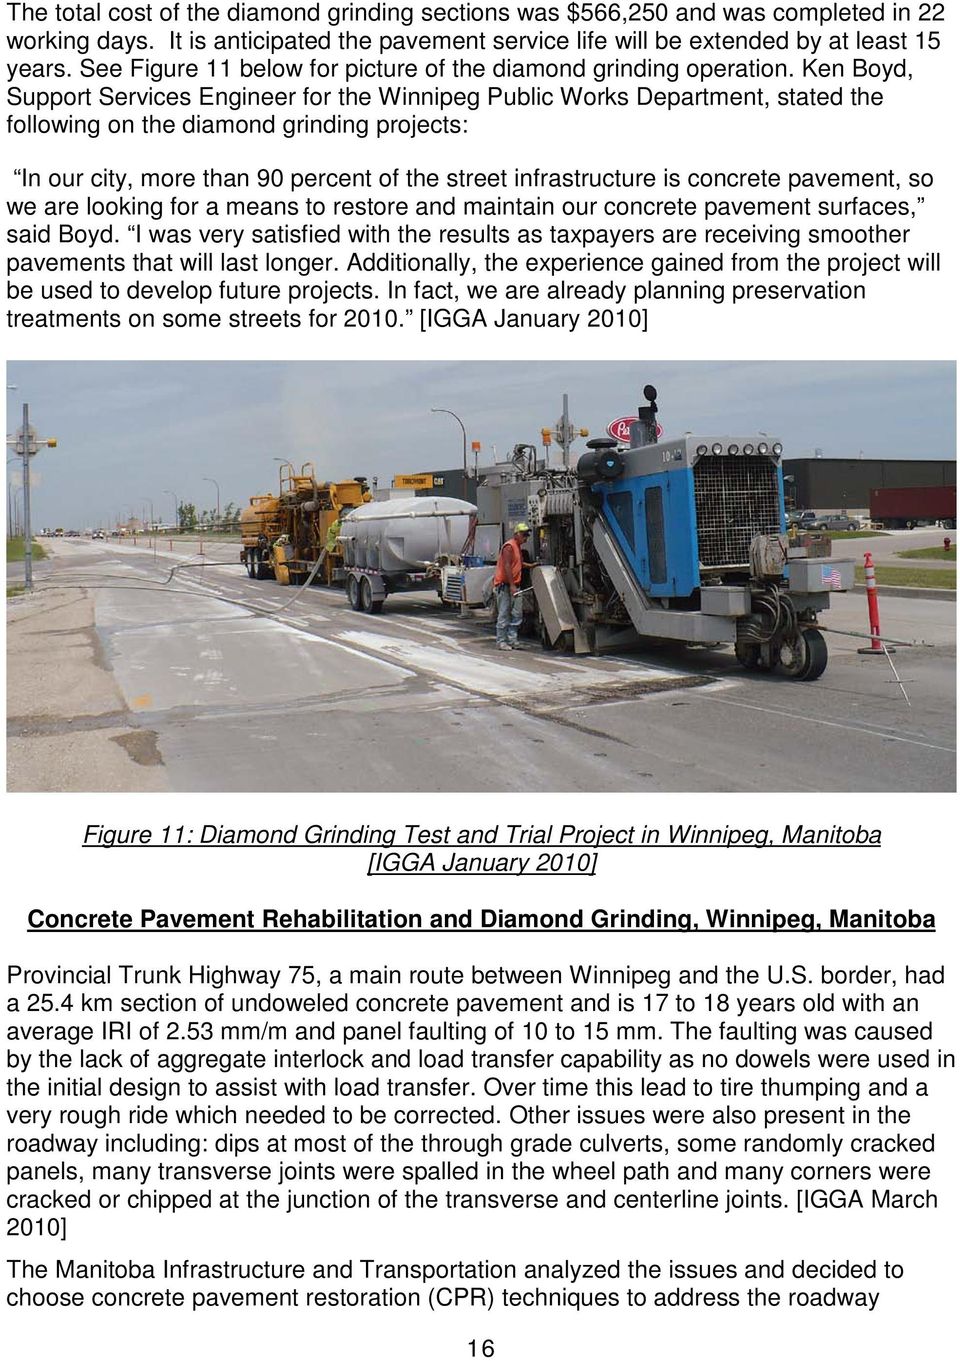 Ken Boyd, Support Services Engineer for the Winnipeg Public Works Department, stated the following on the diamond grinding projects: In our city, more than 90 percent of the street infrastructure is